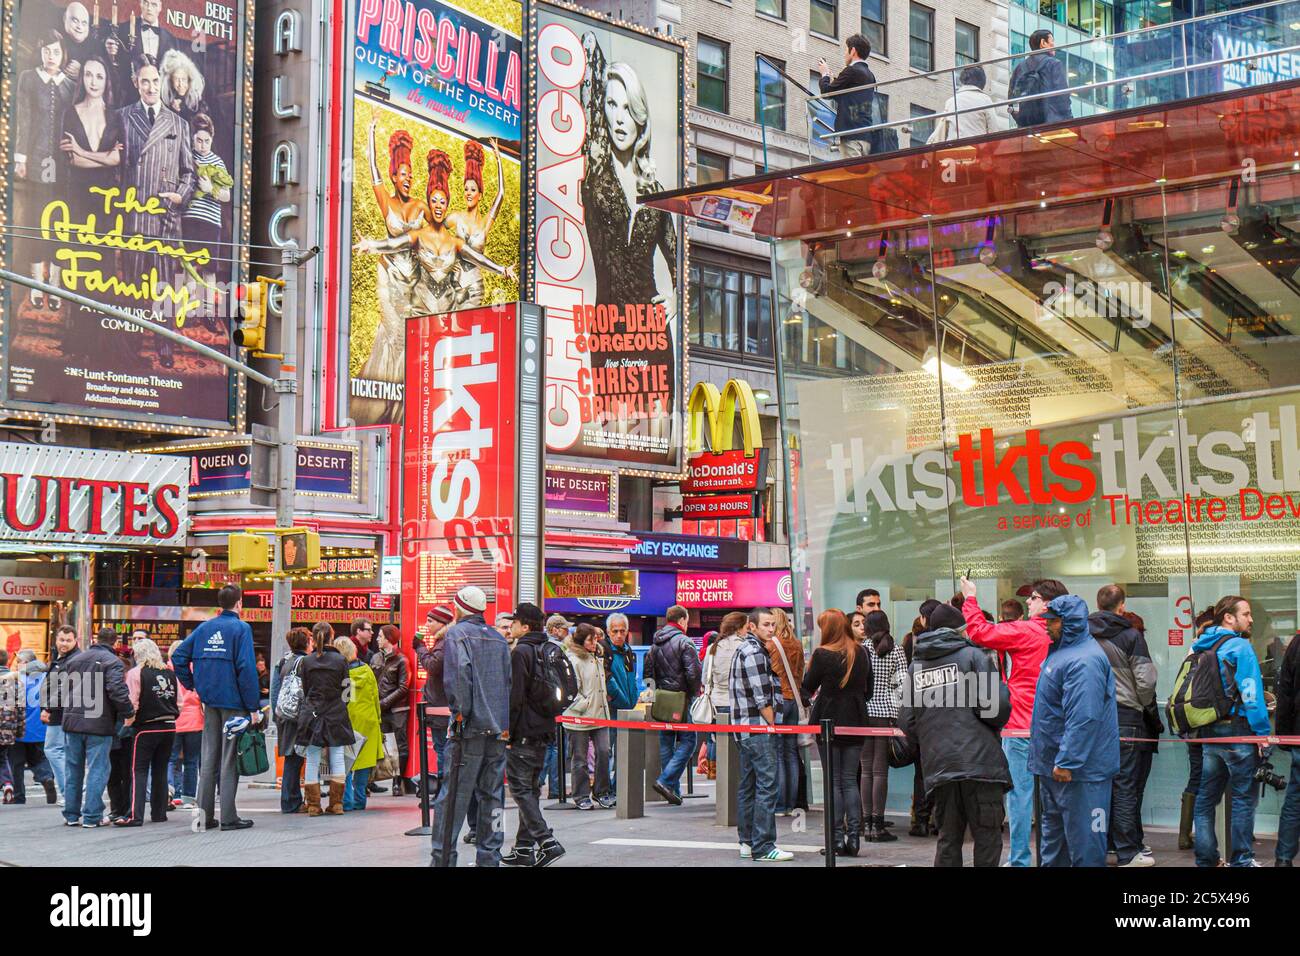 New York City,NYC NY Midtown,Manhattan,Times Square,Theatre District,Broadway,illuminated sign,spectaculars,ad,Chicago,Addams,family families parent p Stock Photo